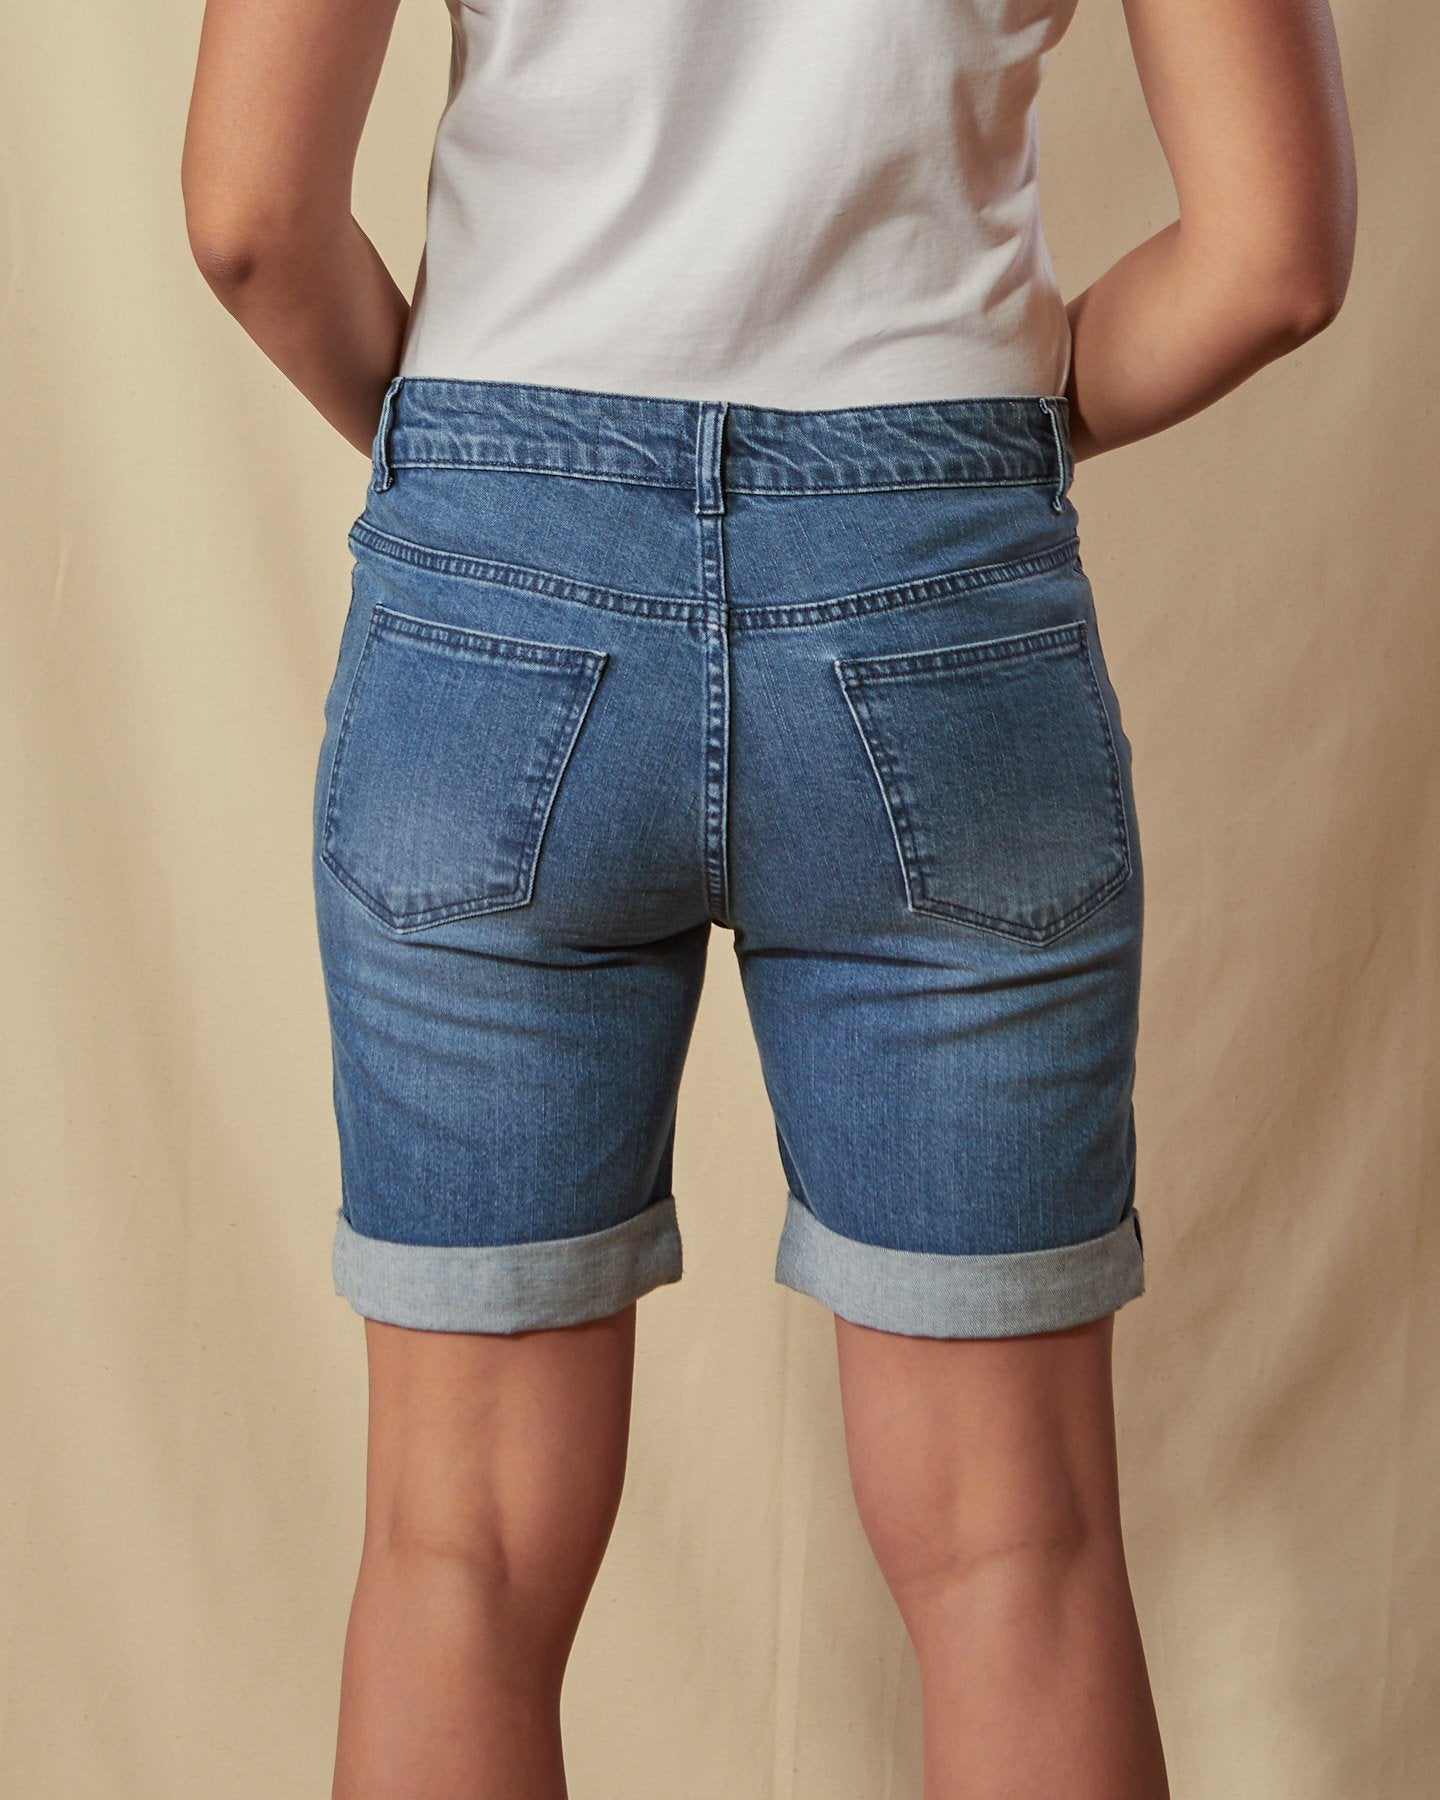 Close-up back view of blue denim Enya shorts focussing on denim texture and stitch detailing.